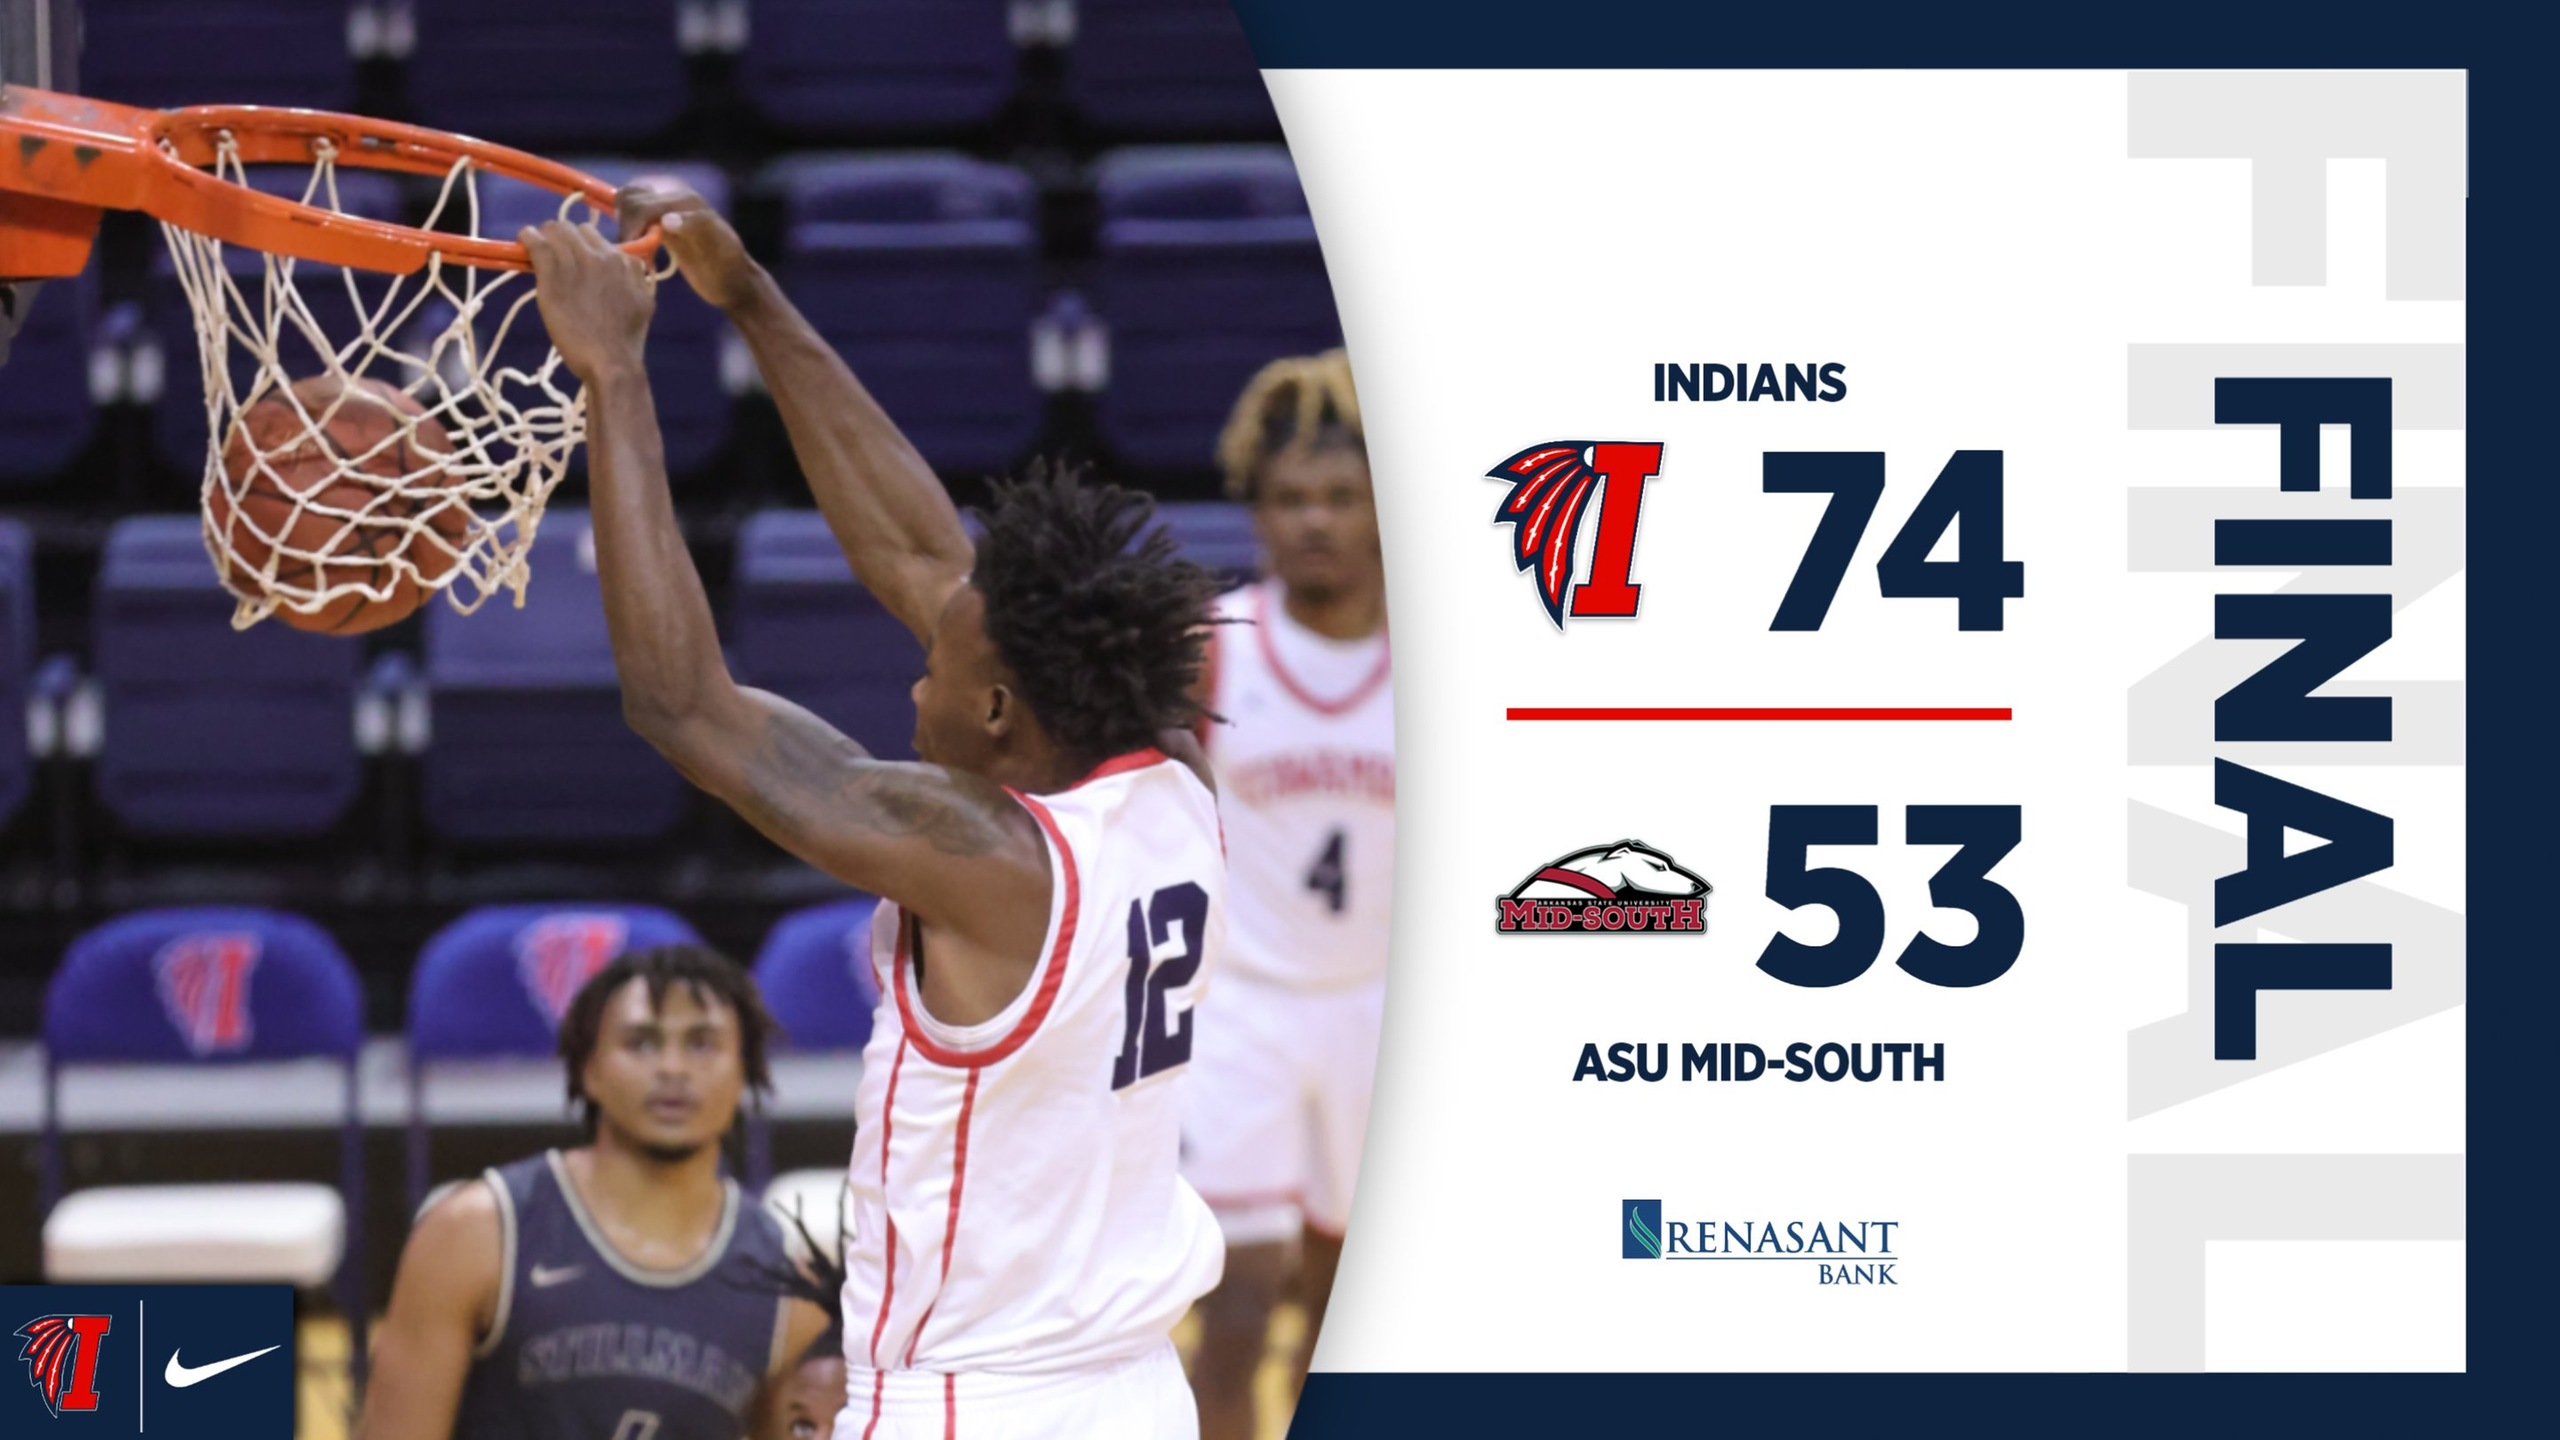 Indians take over in 74-53 road victory over ASU Mid-South